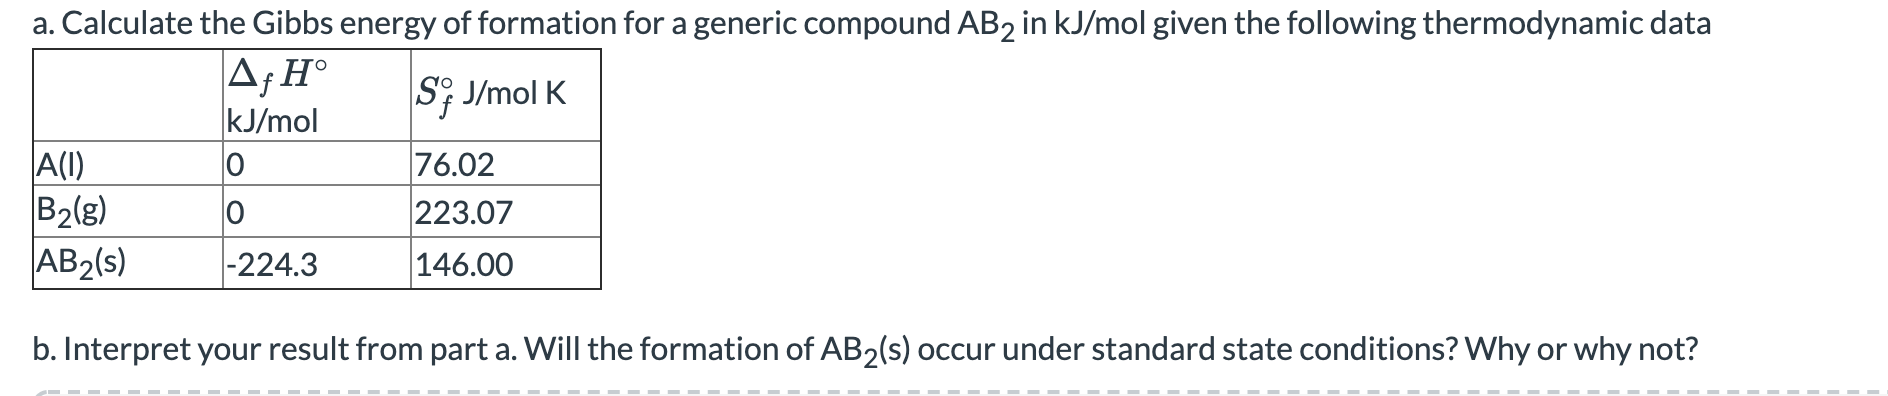 a. Calculate the Gibbs energy of formation for a generic compound AB2 in kJ/mol given the following thermodynamic data
A;H°
kJ/mol
S; J/mol K
A(I)
B2(g)
AB2(s)
76.02
223.07
|-224.3
146.00
b. Interpret your result from part a. Will the formation of AB2(s) occur under standard state conditions? Why or why not?
